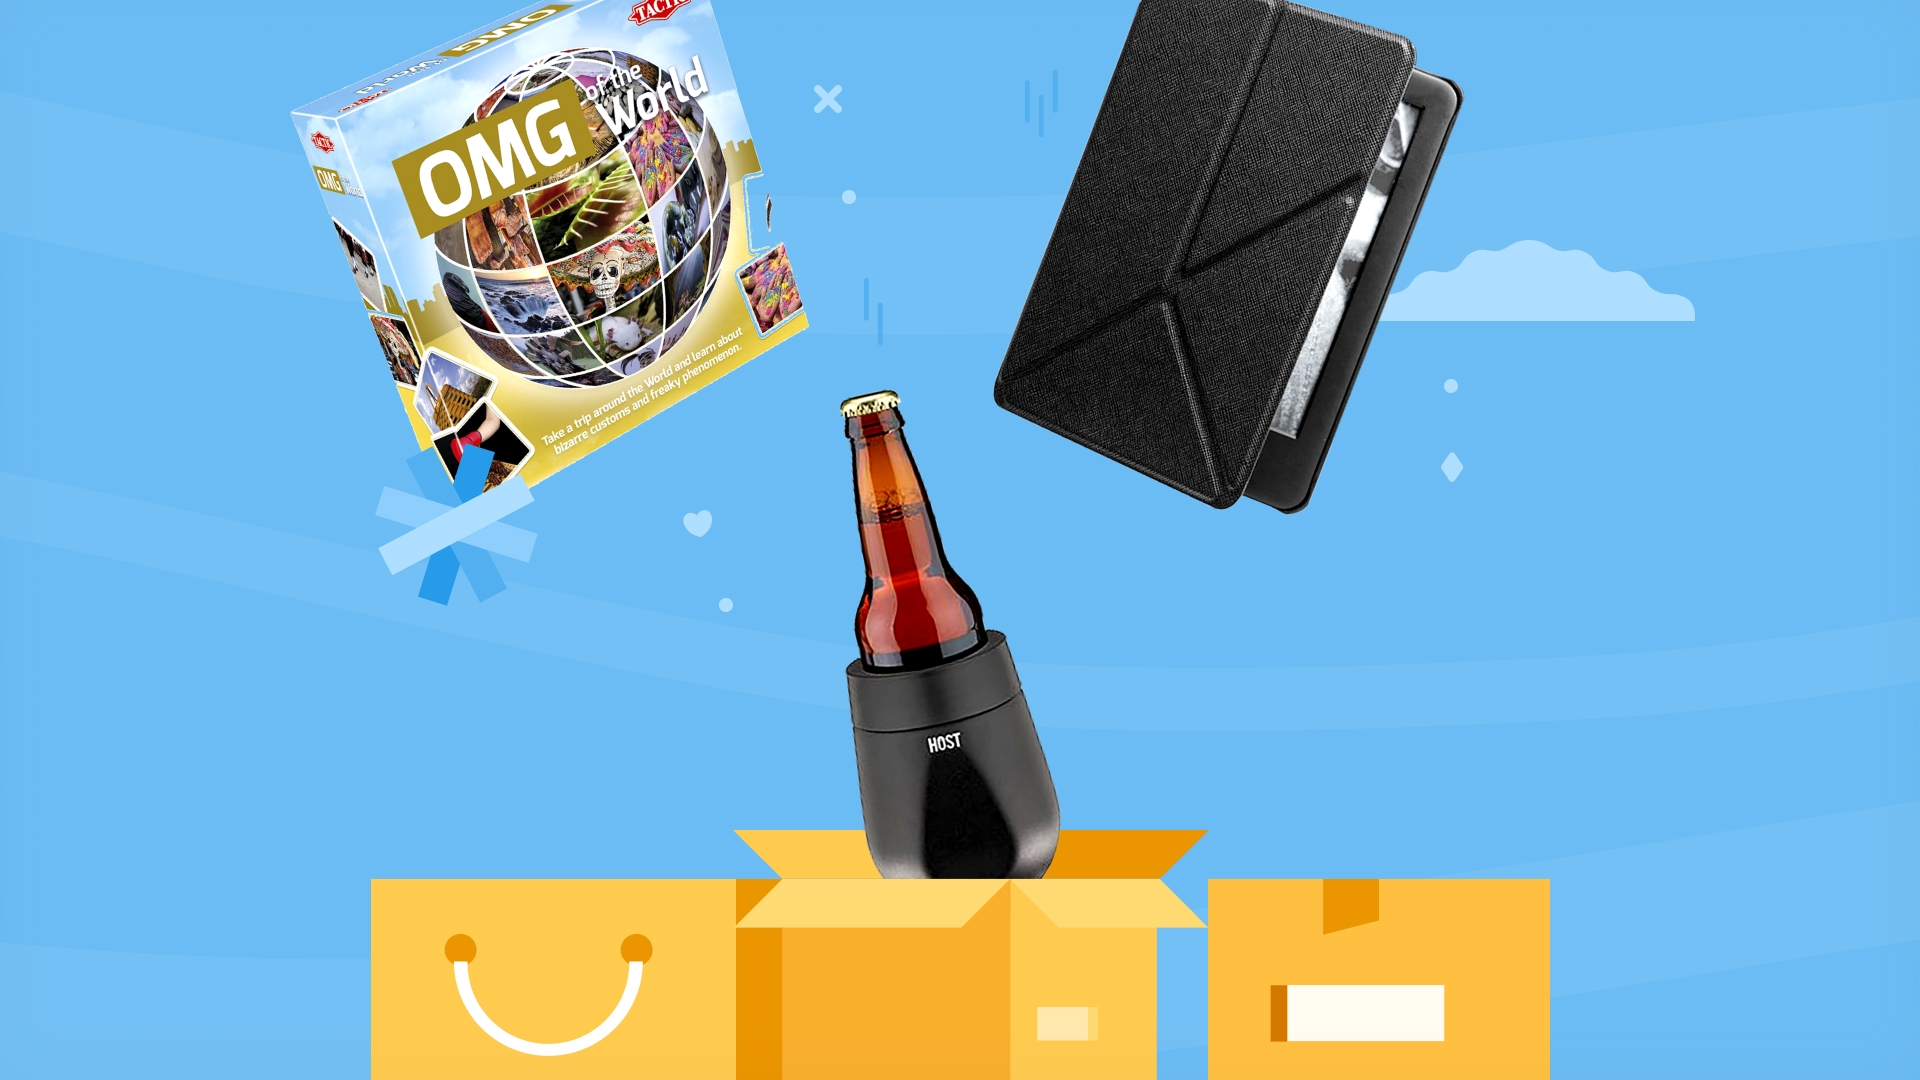  A selection of gifts on a blue background including a can cooler, a Kindle case and a trivia game.